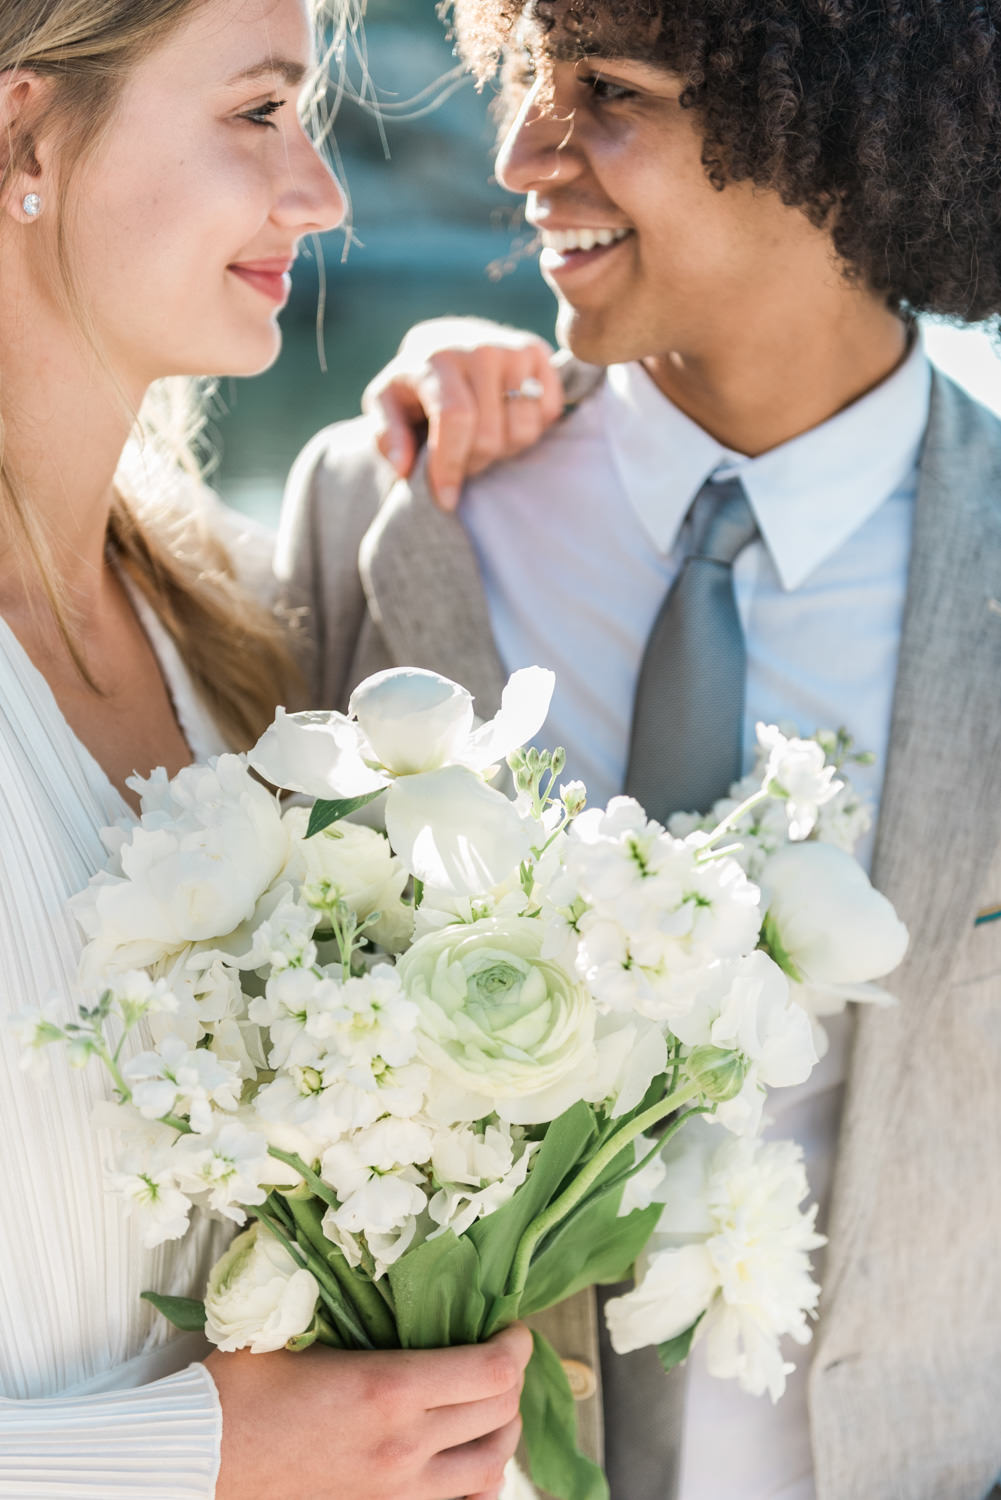 Advise on how to get your wedding published